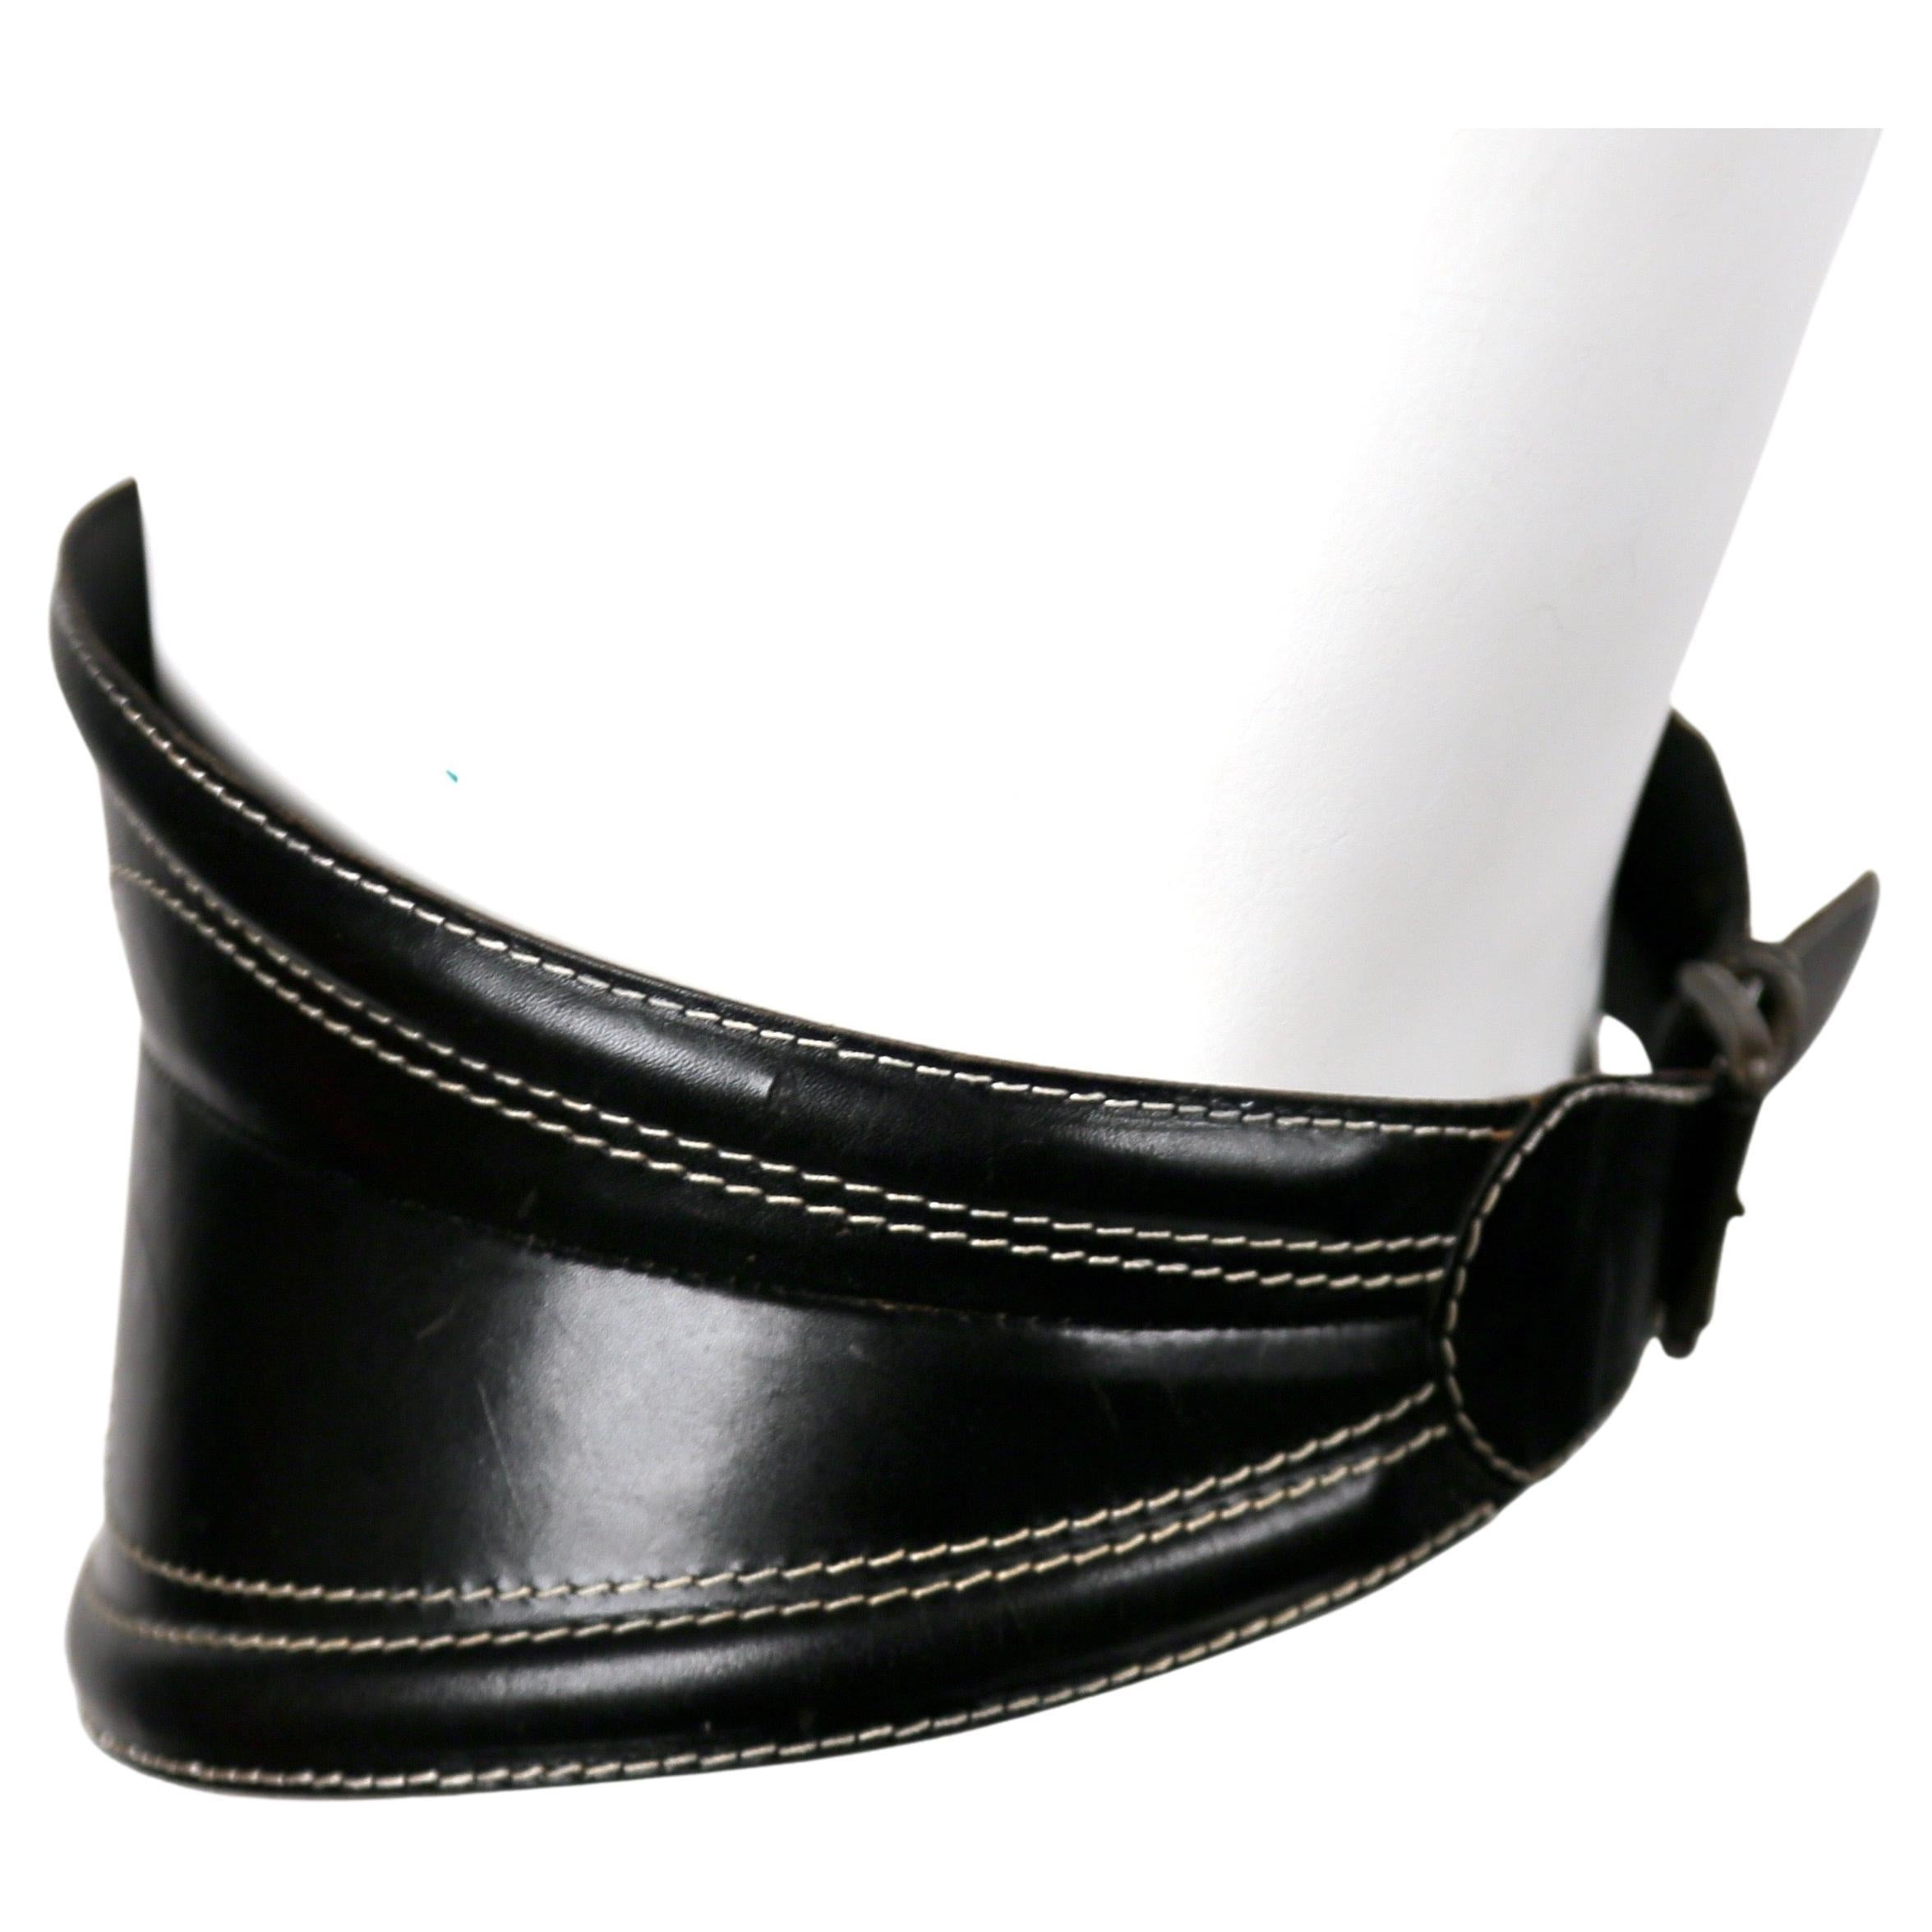 1980's GIANFRANCO FERRE wide black leather belt with top-stitching In Good Condition For Sale In San Fransisco, CA